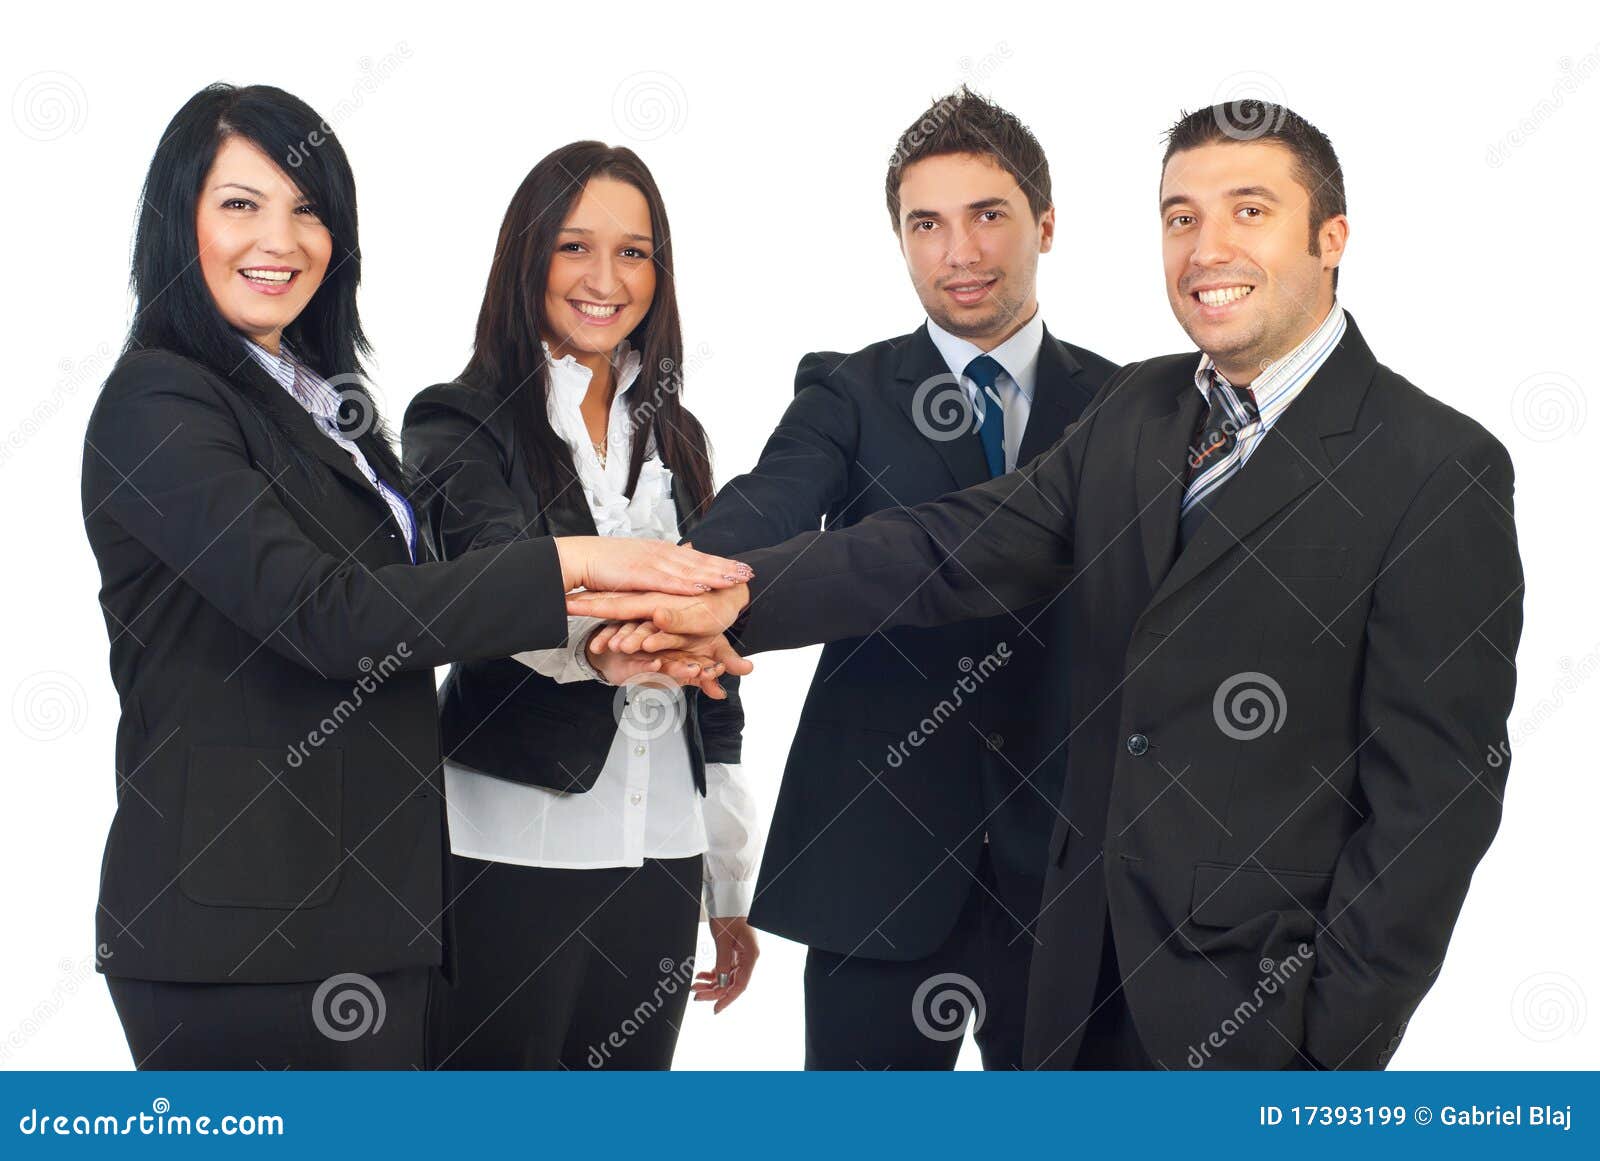 United Group of Business People Stock Image - Image of males, coworkers